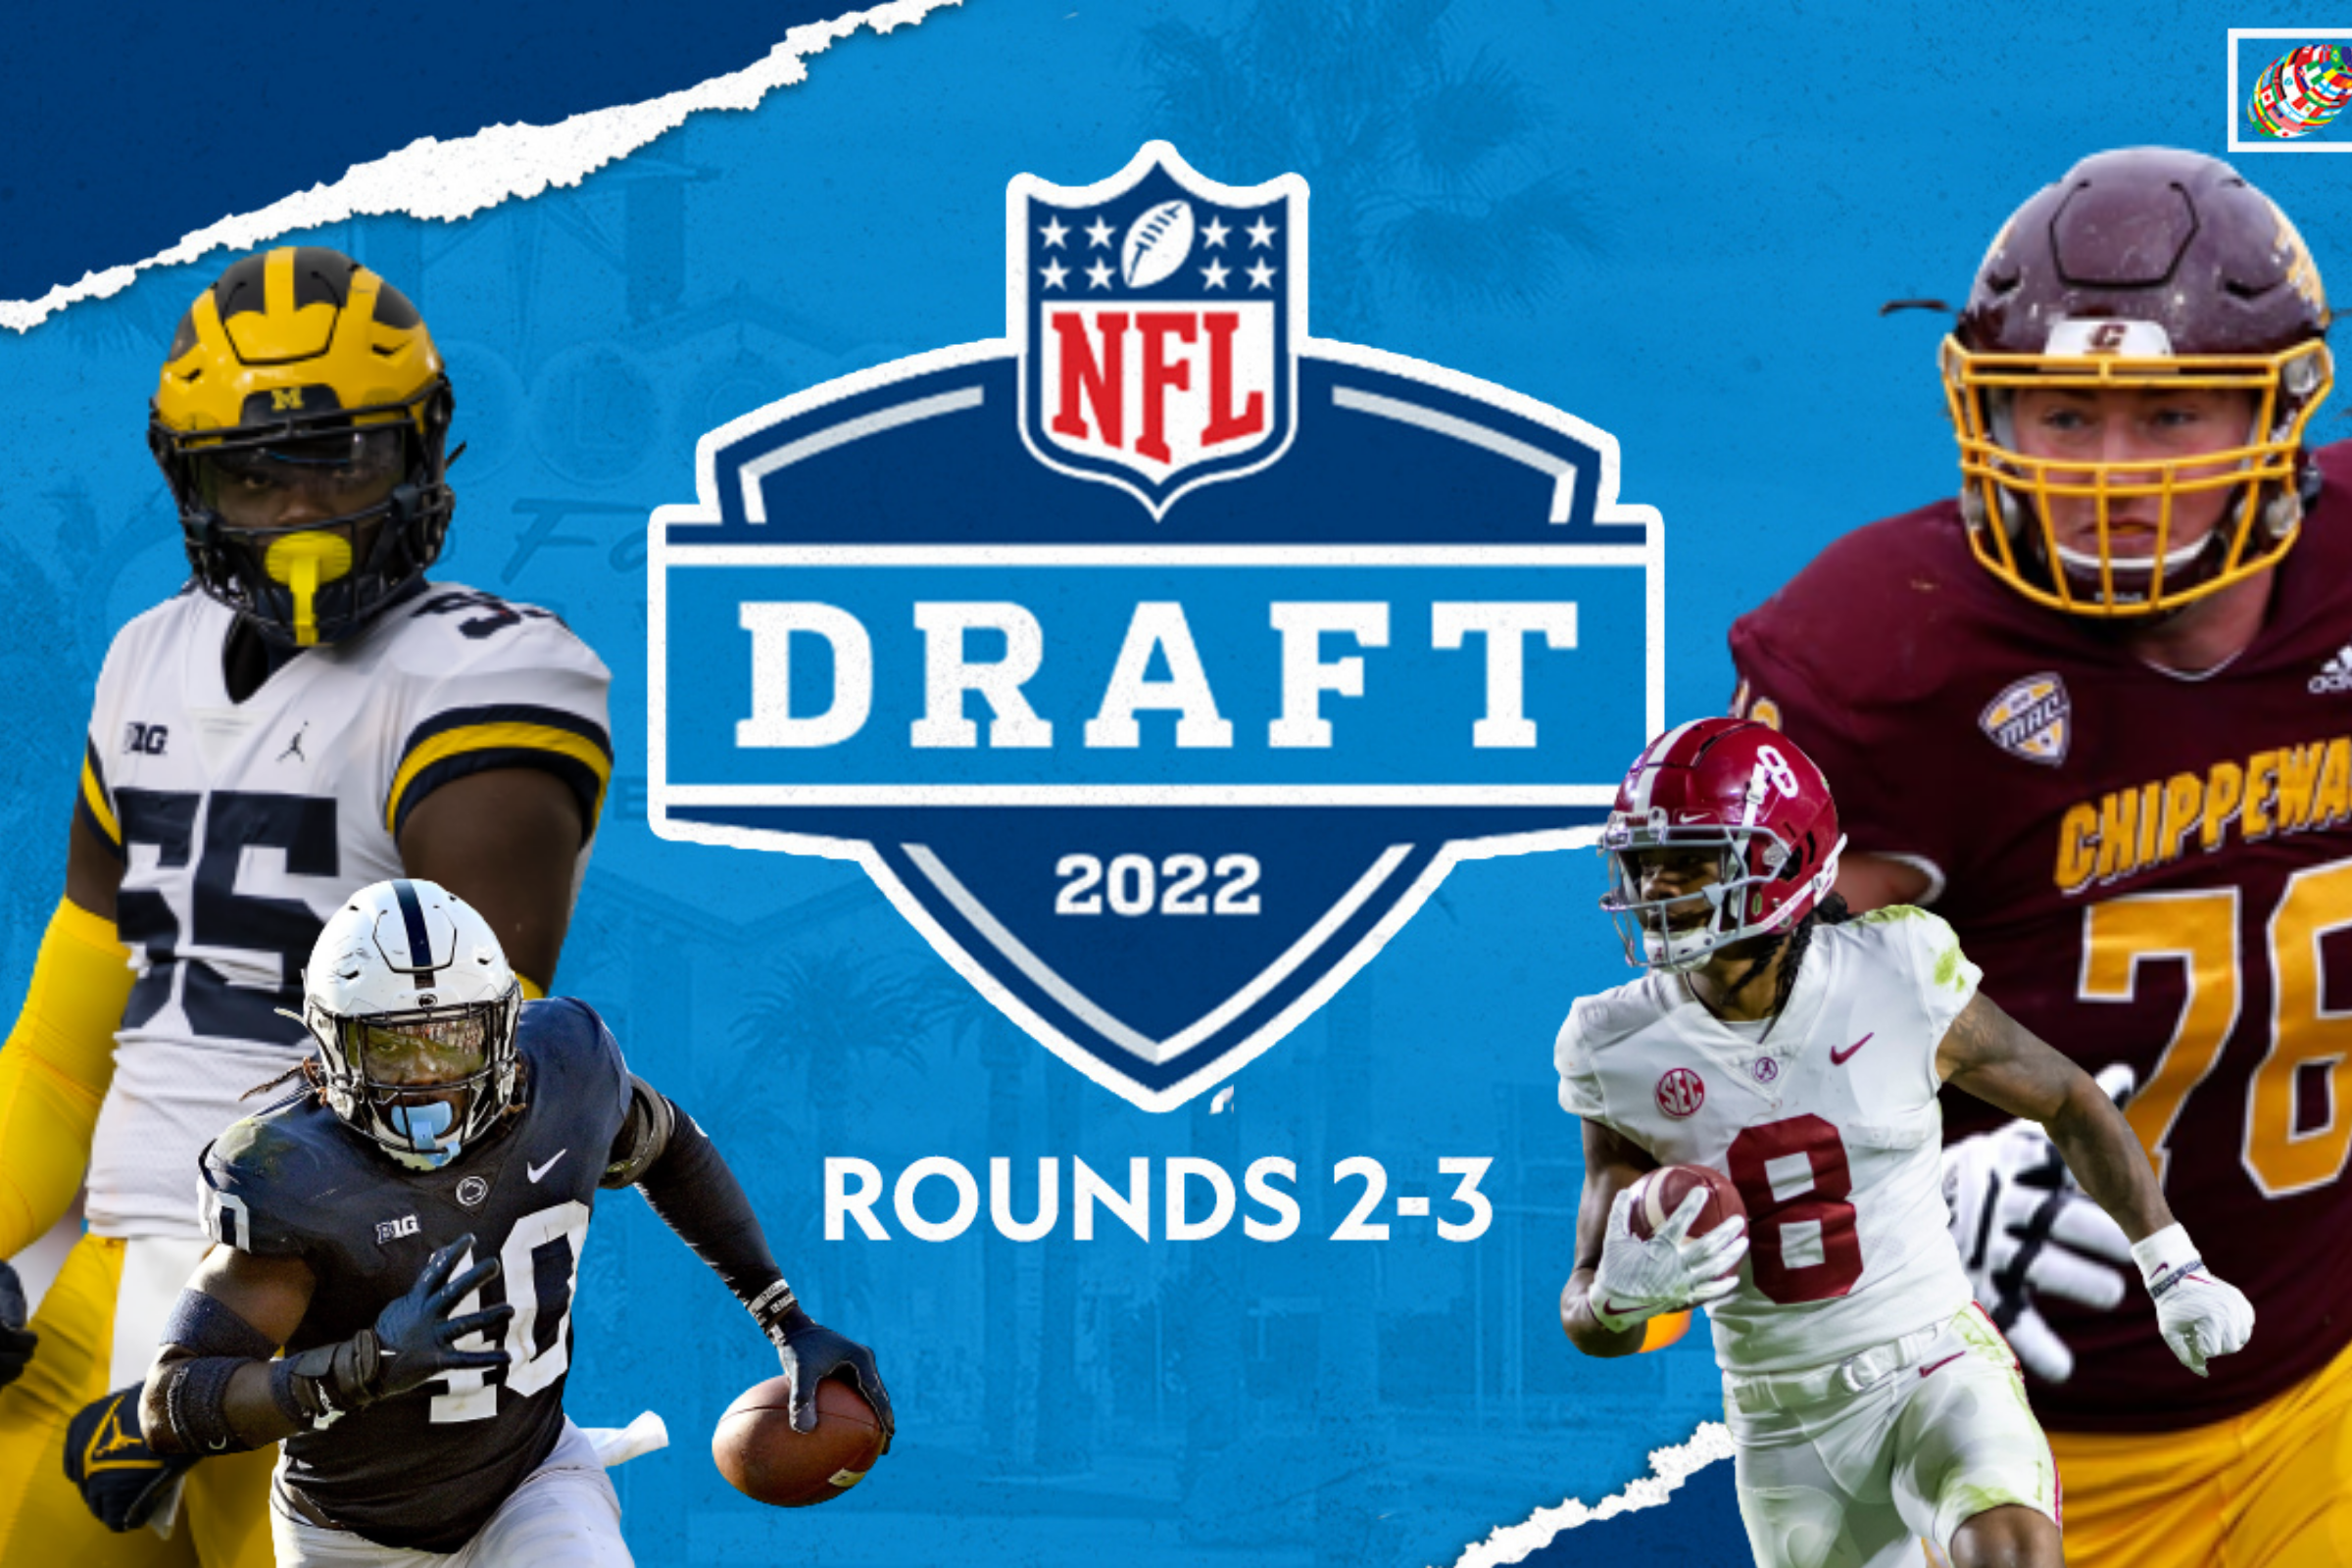 NFL Draft Day Two: Best International Players to watch for - Rounds 2 & 3